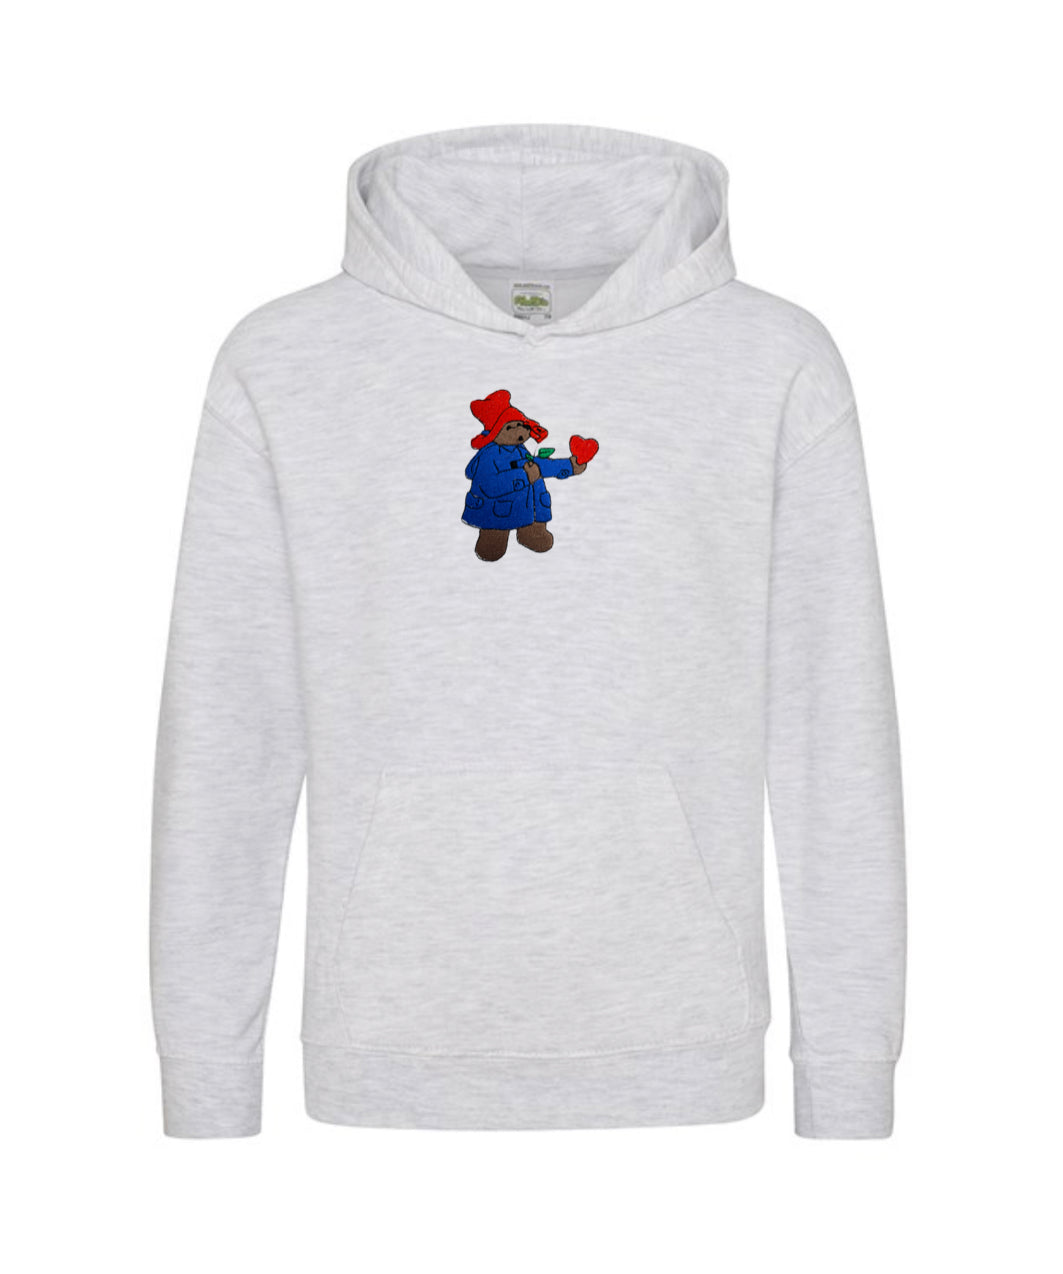 Paddington Bear Hoodie For Adults and Children